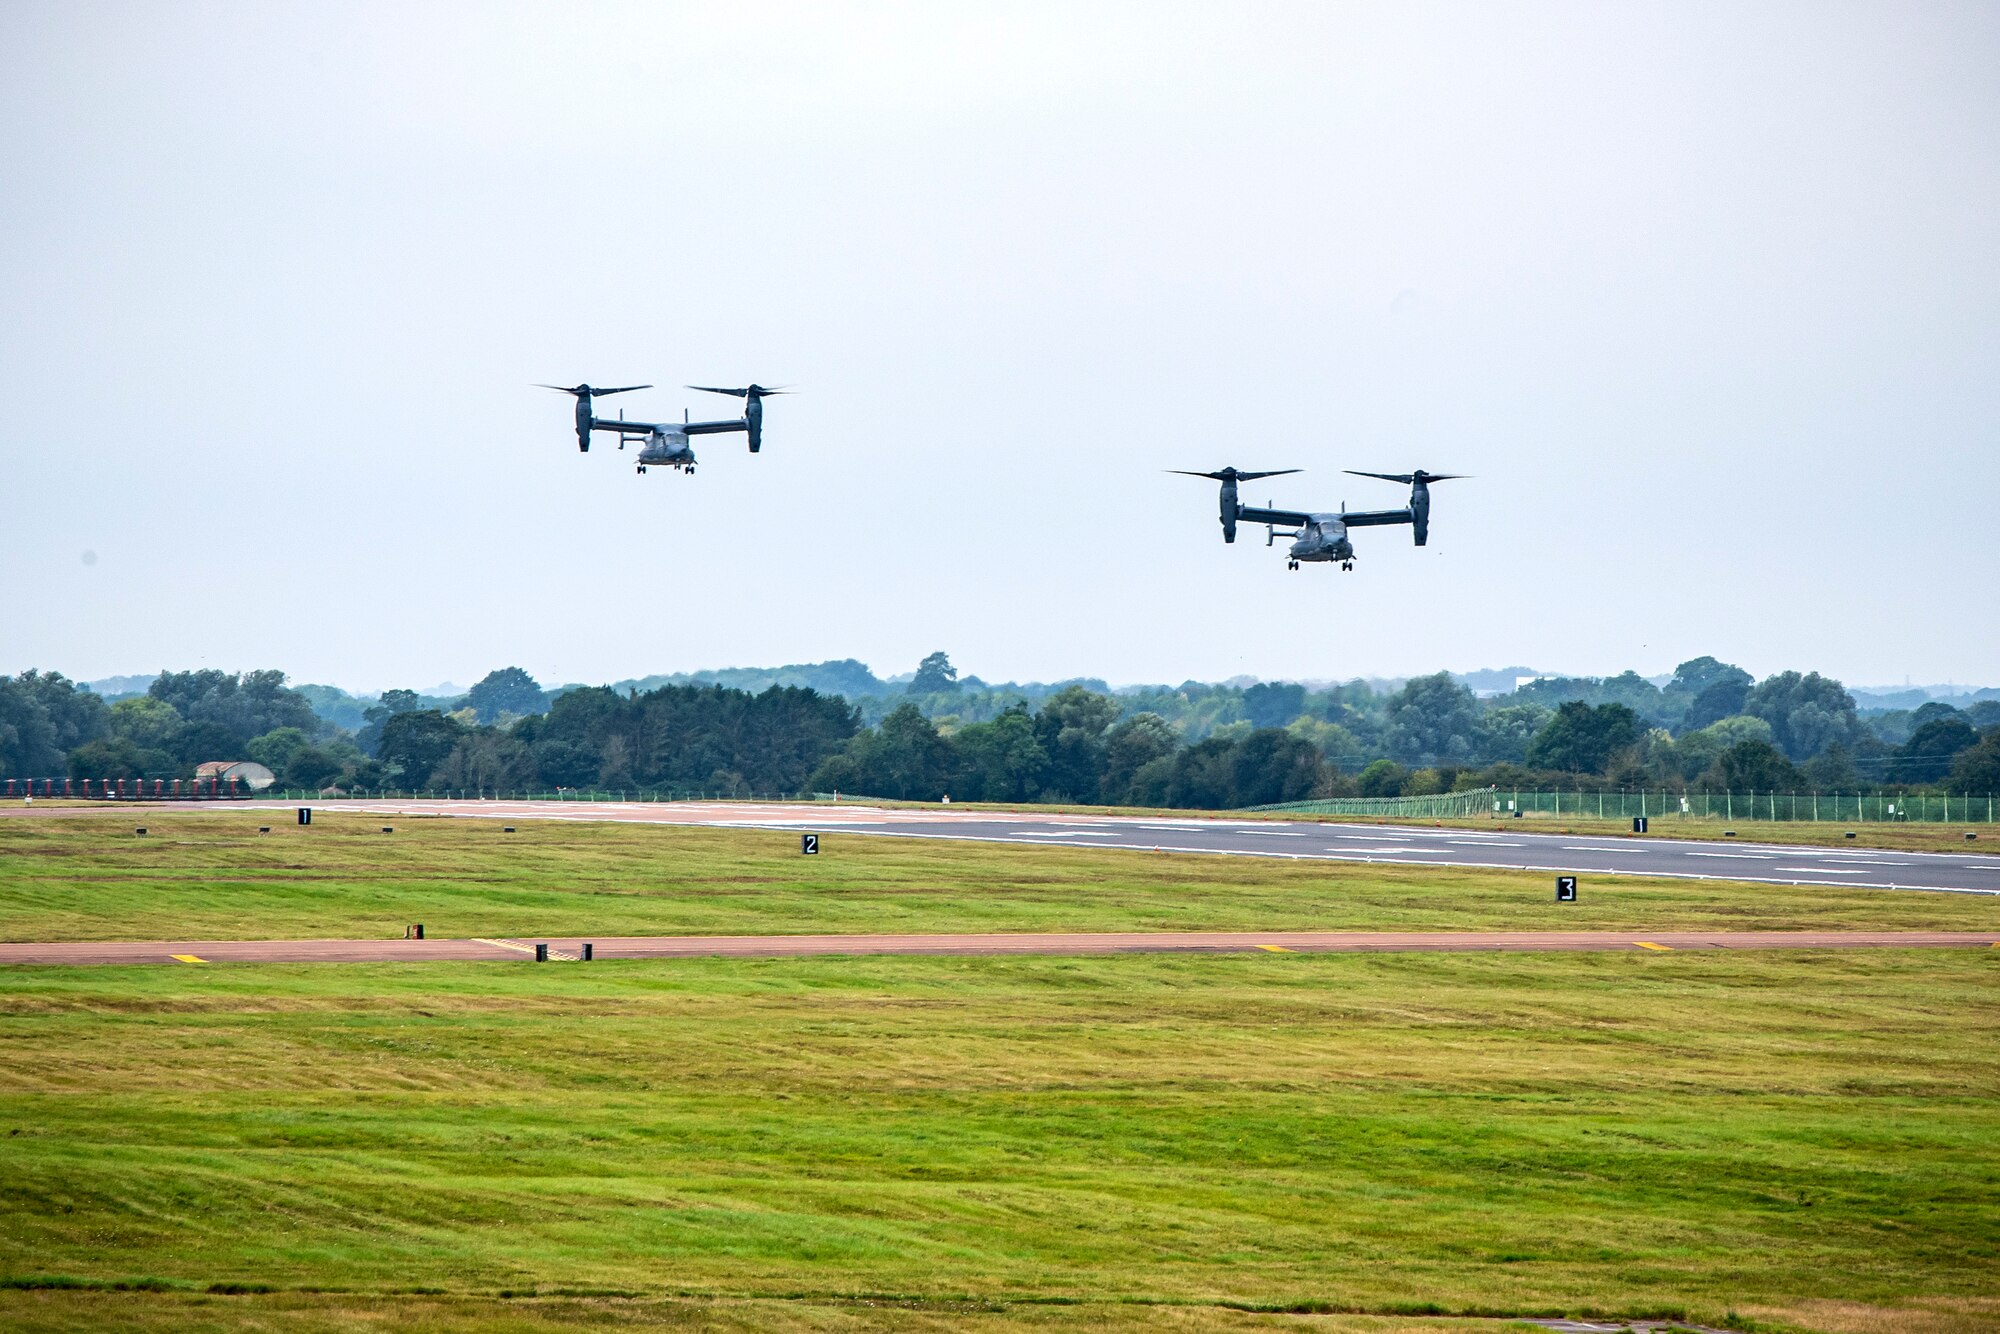 Two CV-22A Ospreys assigned to the 352d Special Operations Wing approach for landing during an Agile Combat Employment exercise at RAF Fairford, England, Sept. 13, 2021. Airmen from the 501st Combat Support Wing, 100th Air Refueling Wing and 352d SOW partnered to conduct an ACE exercise to test their overall readiness and lethality capabilities. ACE ensures Airmen and aircrews are postured to deliver lethal combat power across the full spectrum of military operations. (U.S. Air Force photo by Senior Airman Eugene Oliver)